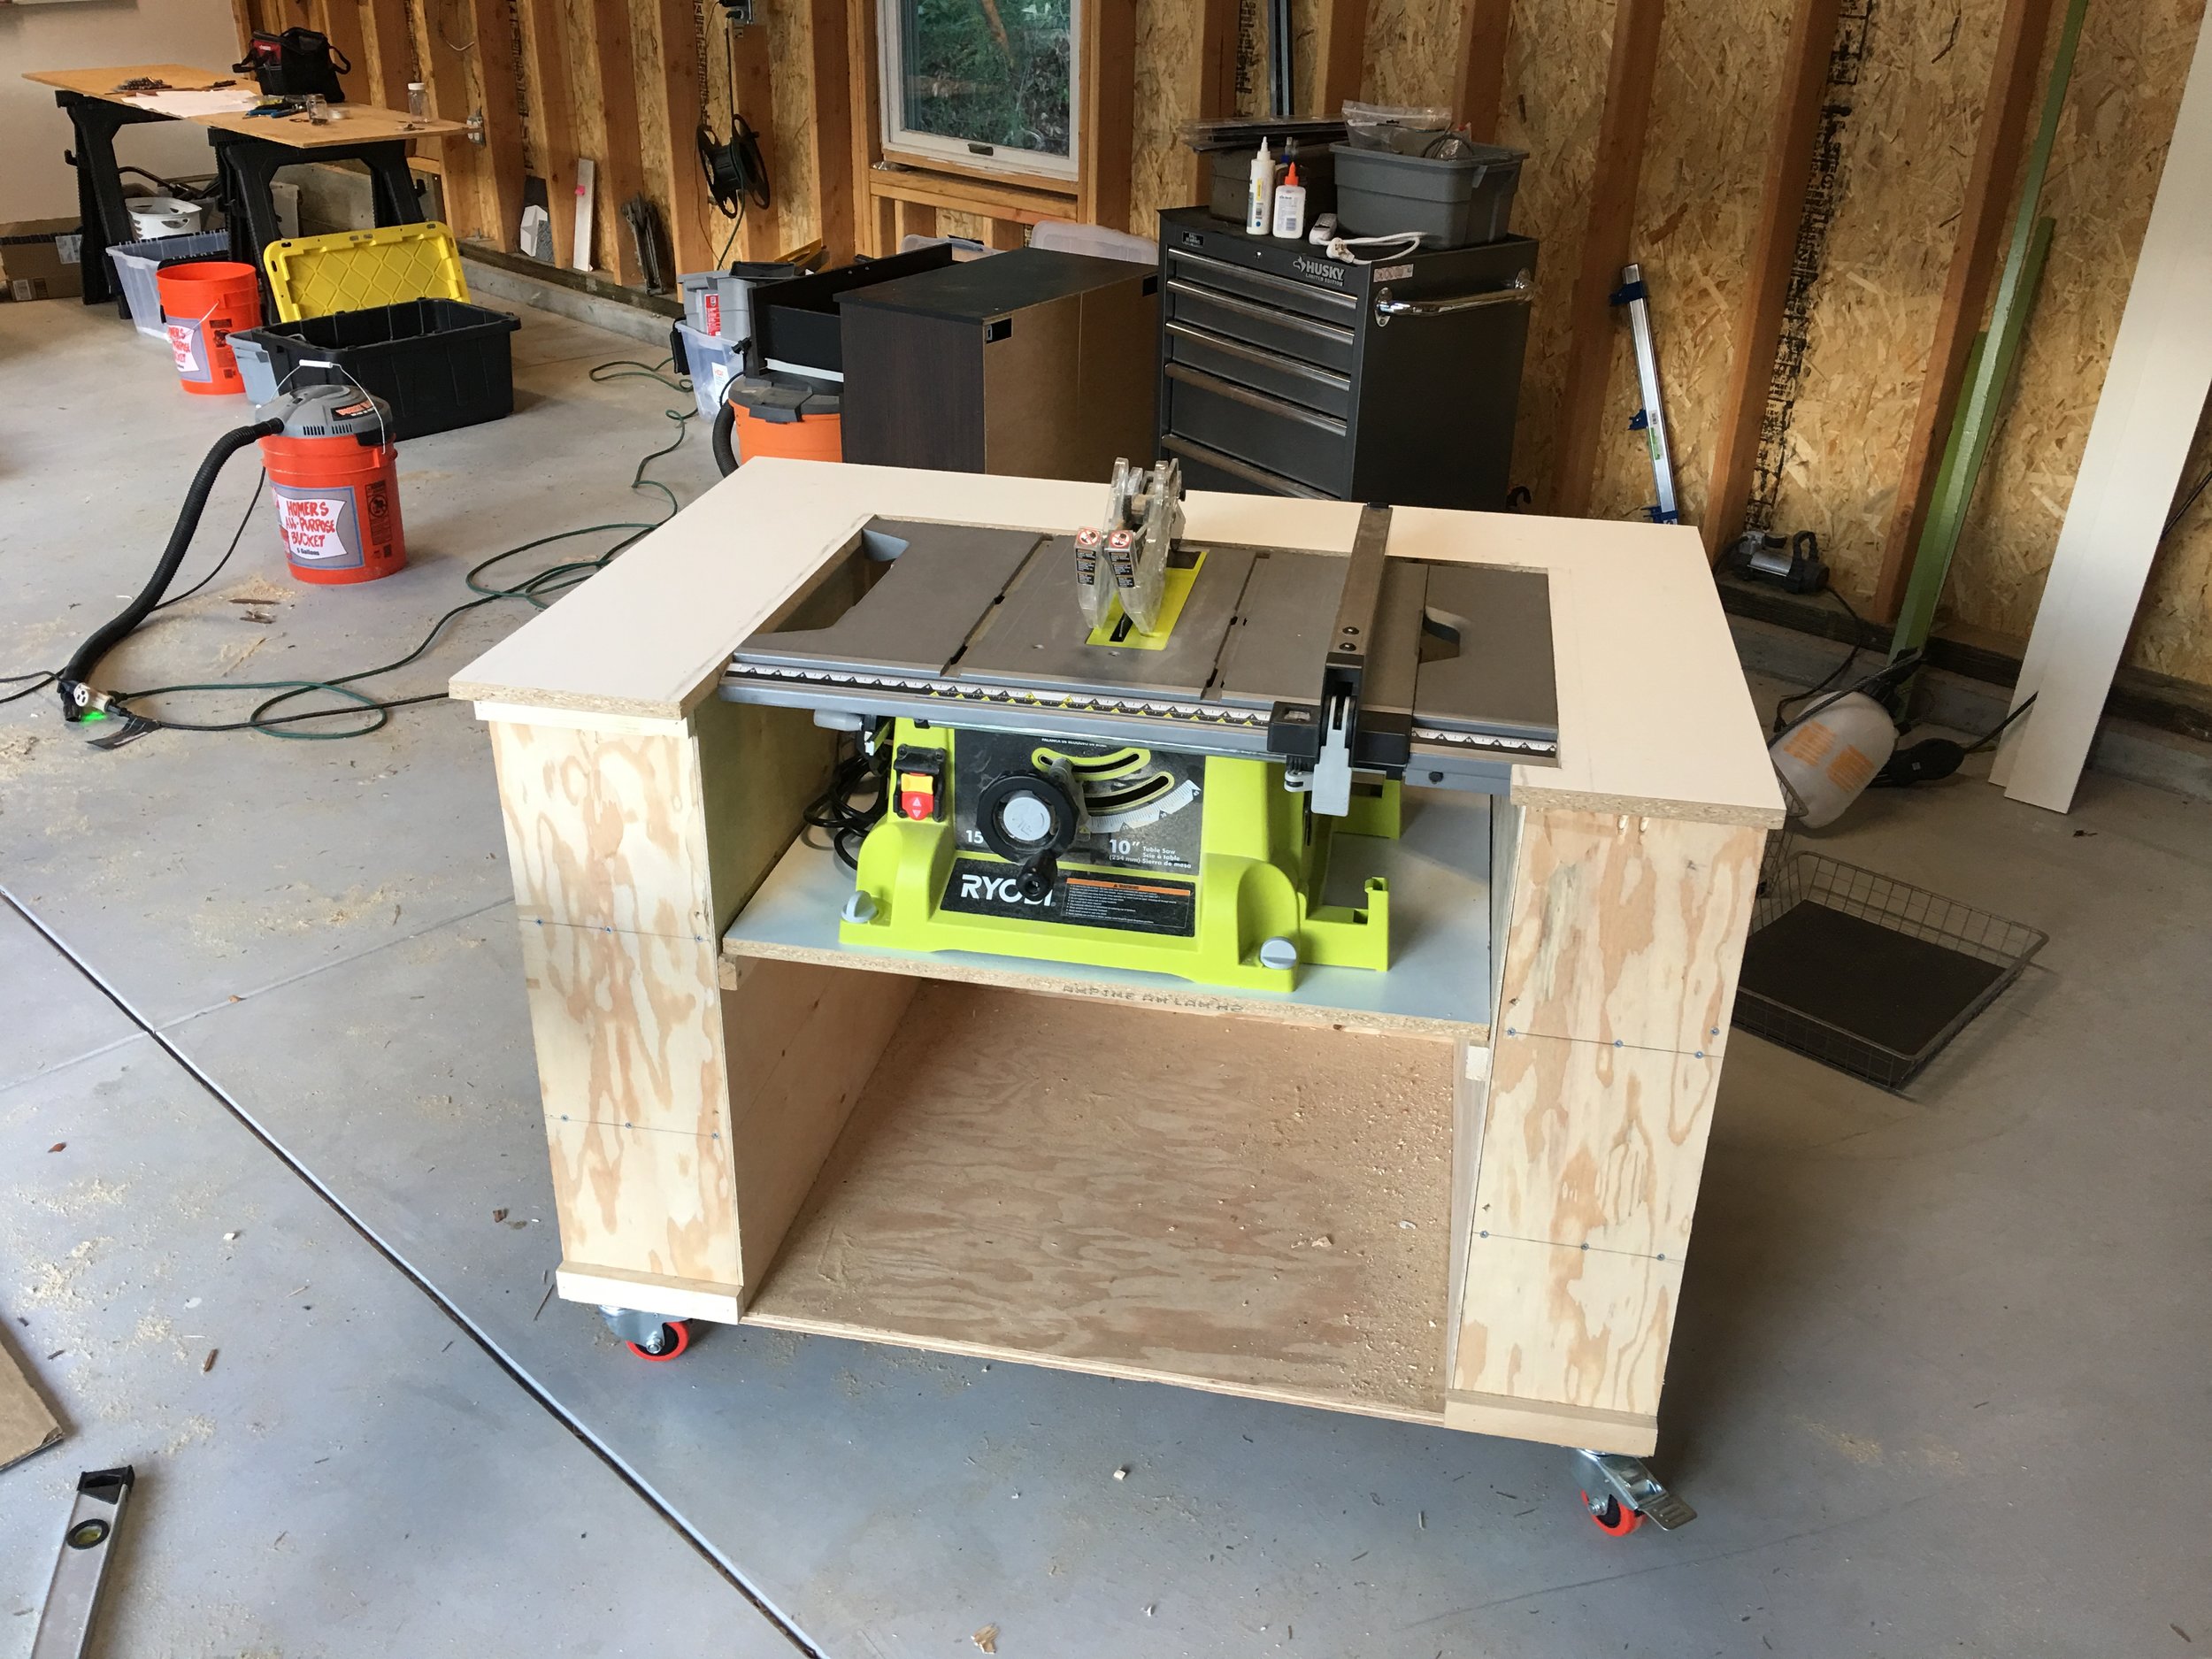 Test fit of the table saw.